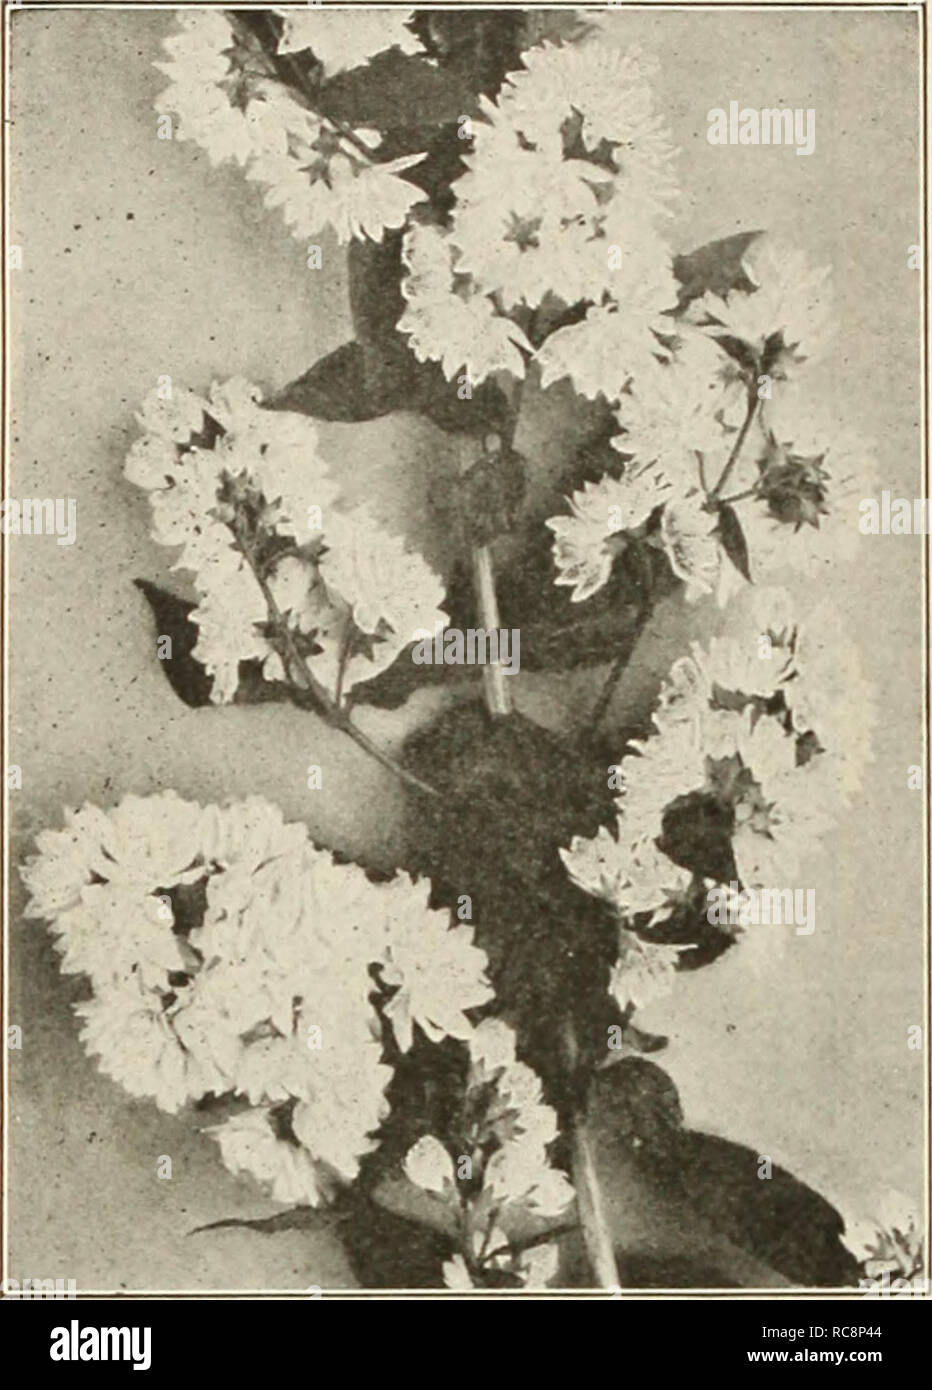 . Dreer's garden book 1925. Seeds Catalogs; Nursery stock Catalogs; Gardening Equipment and supplies Catalogs; Flowers Seeds Catalogs; Vegetables Seeds Catalogs; Fruit Seeds Catalogs. 200 /flEflPO^AJimiilraliiJ'ffljMhdlliKtl^HIIMH^. Deutzia Cresata Magnifica Deutzias. Well-known profuse flowering Shrubs, blooming in spring or eirly summer. The dwarf varieties are desirable for forcing under glass. Evonymus Japonica. An evergreen shrub with large round, glossy, dark green foliage, a splendid plant for foundation [)lanting, par- ticularly at the seashore, also fine to grow on in pots or tubs for Stock Photo